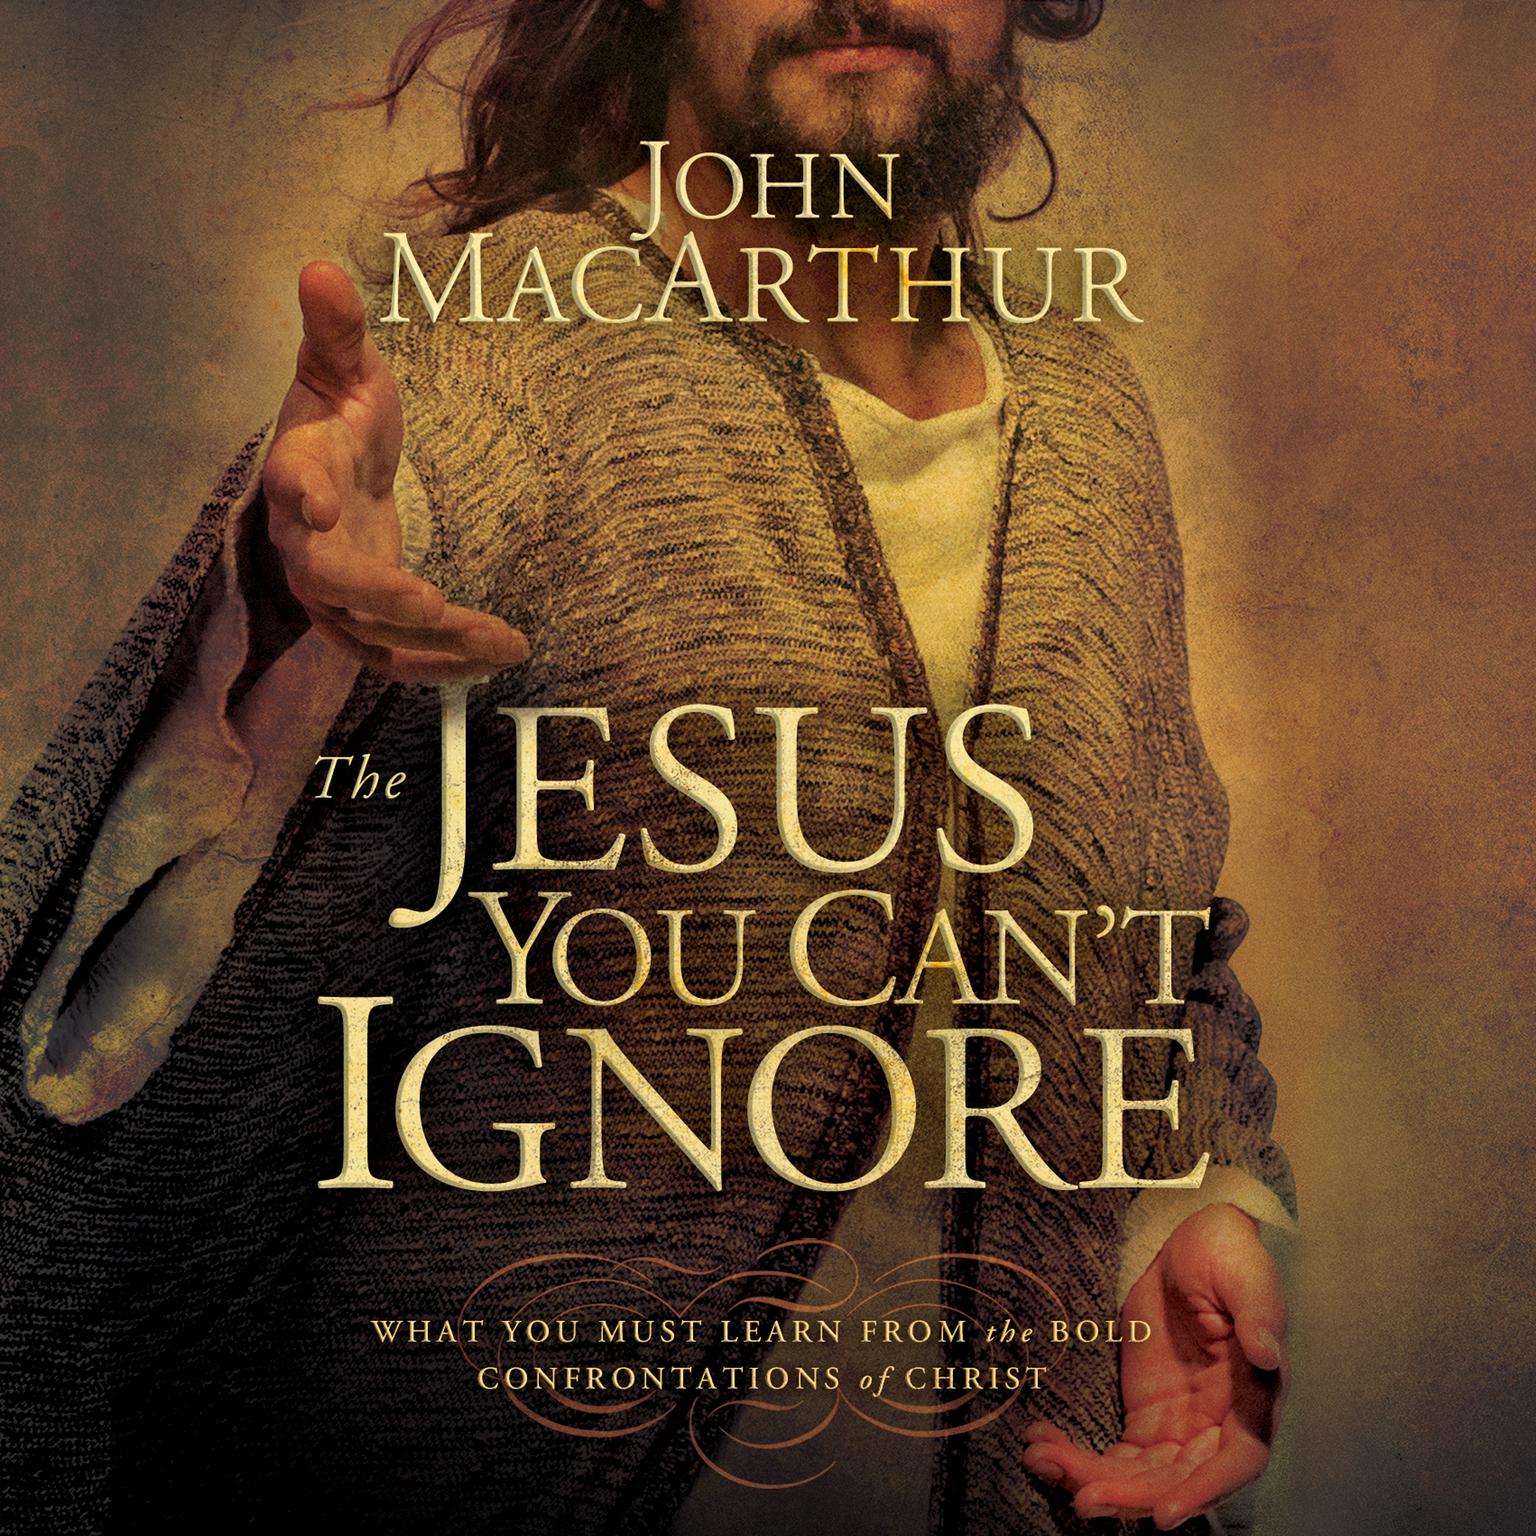 The Jesus You Cant Ignore (Abridged): What You Must Learn from the Bold Confrontations of Christ Audiobook, by John MacArthur